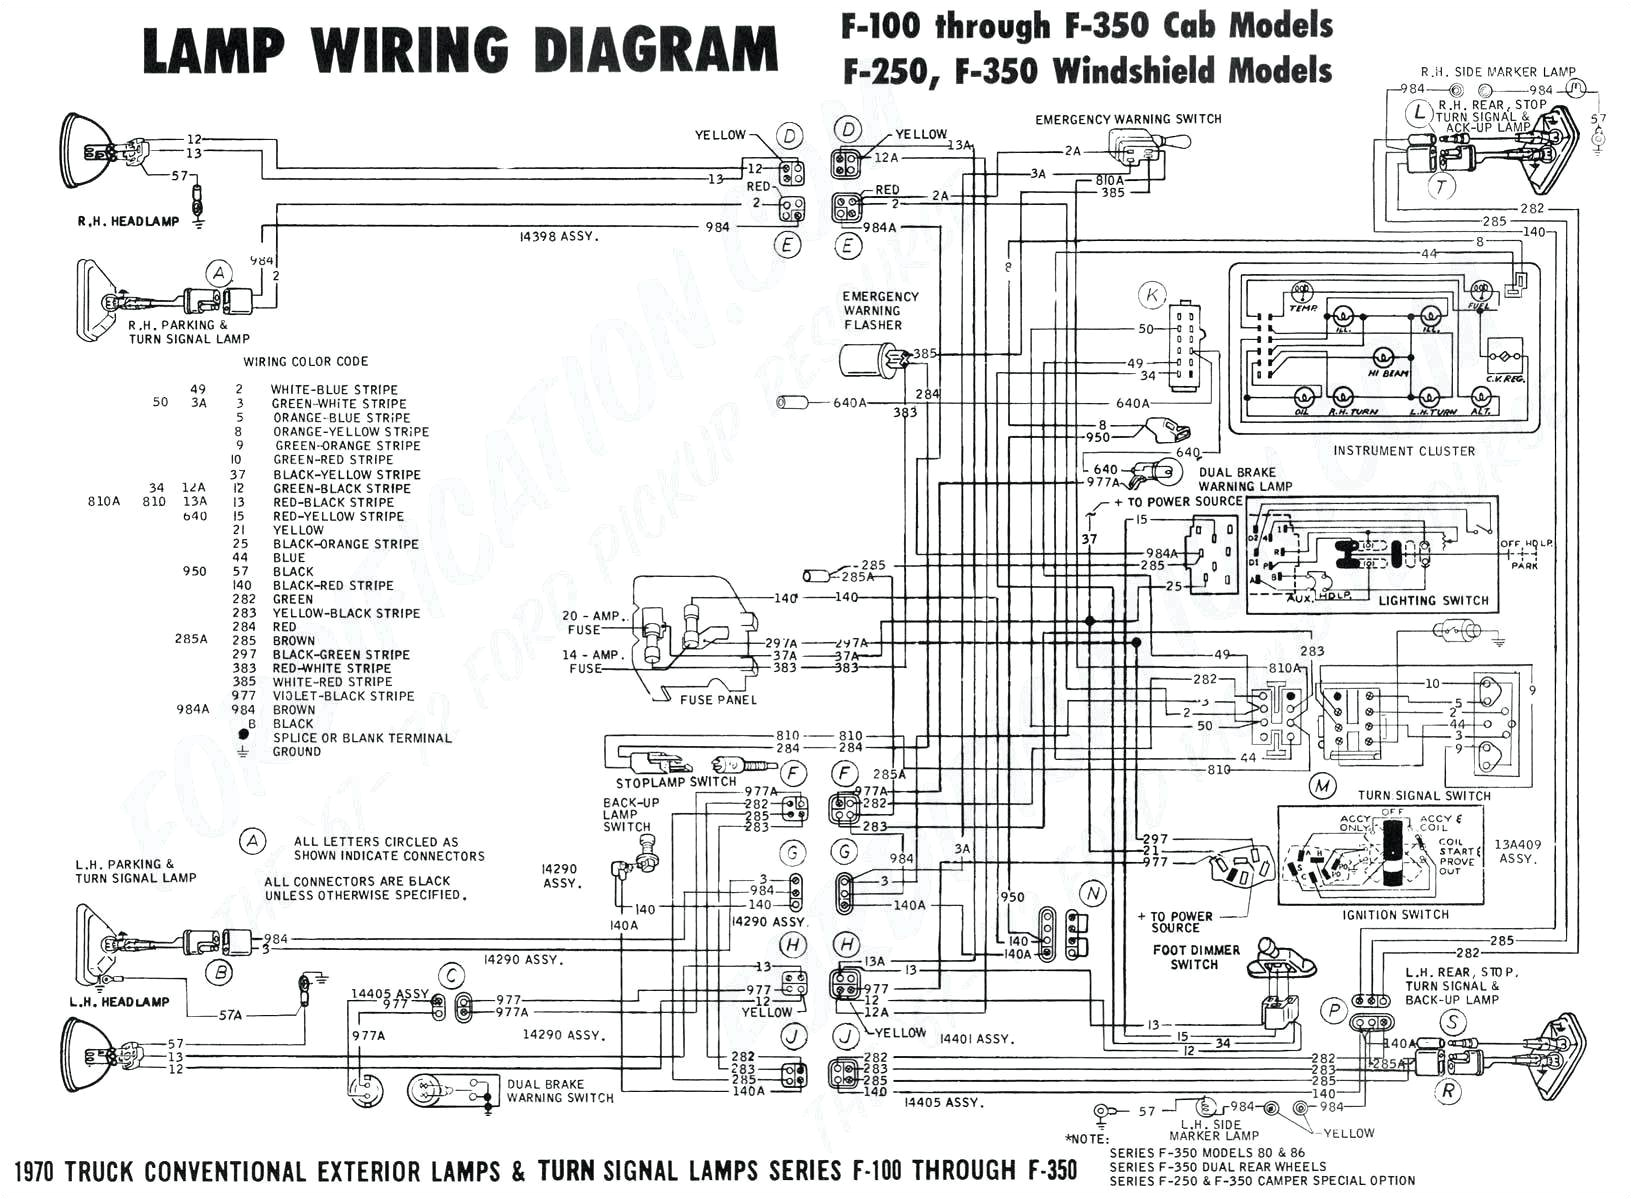 98 Chevy S10 Radio Wiring Diagram Chevy Cobalt Fuel Pump Wiring Harness Wiring Diagram Page